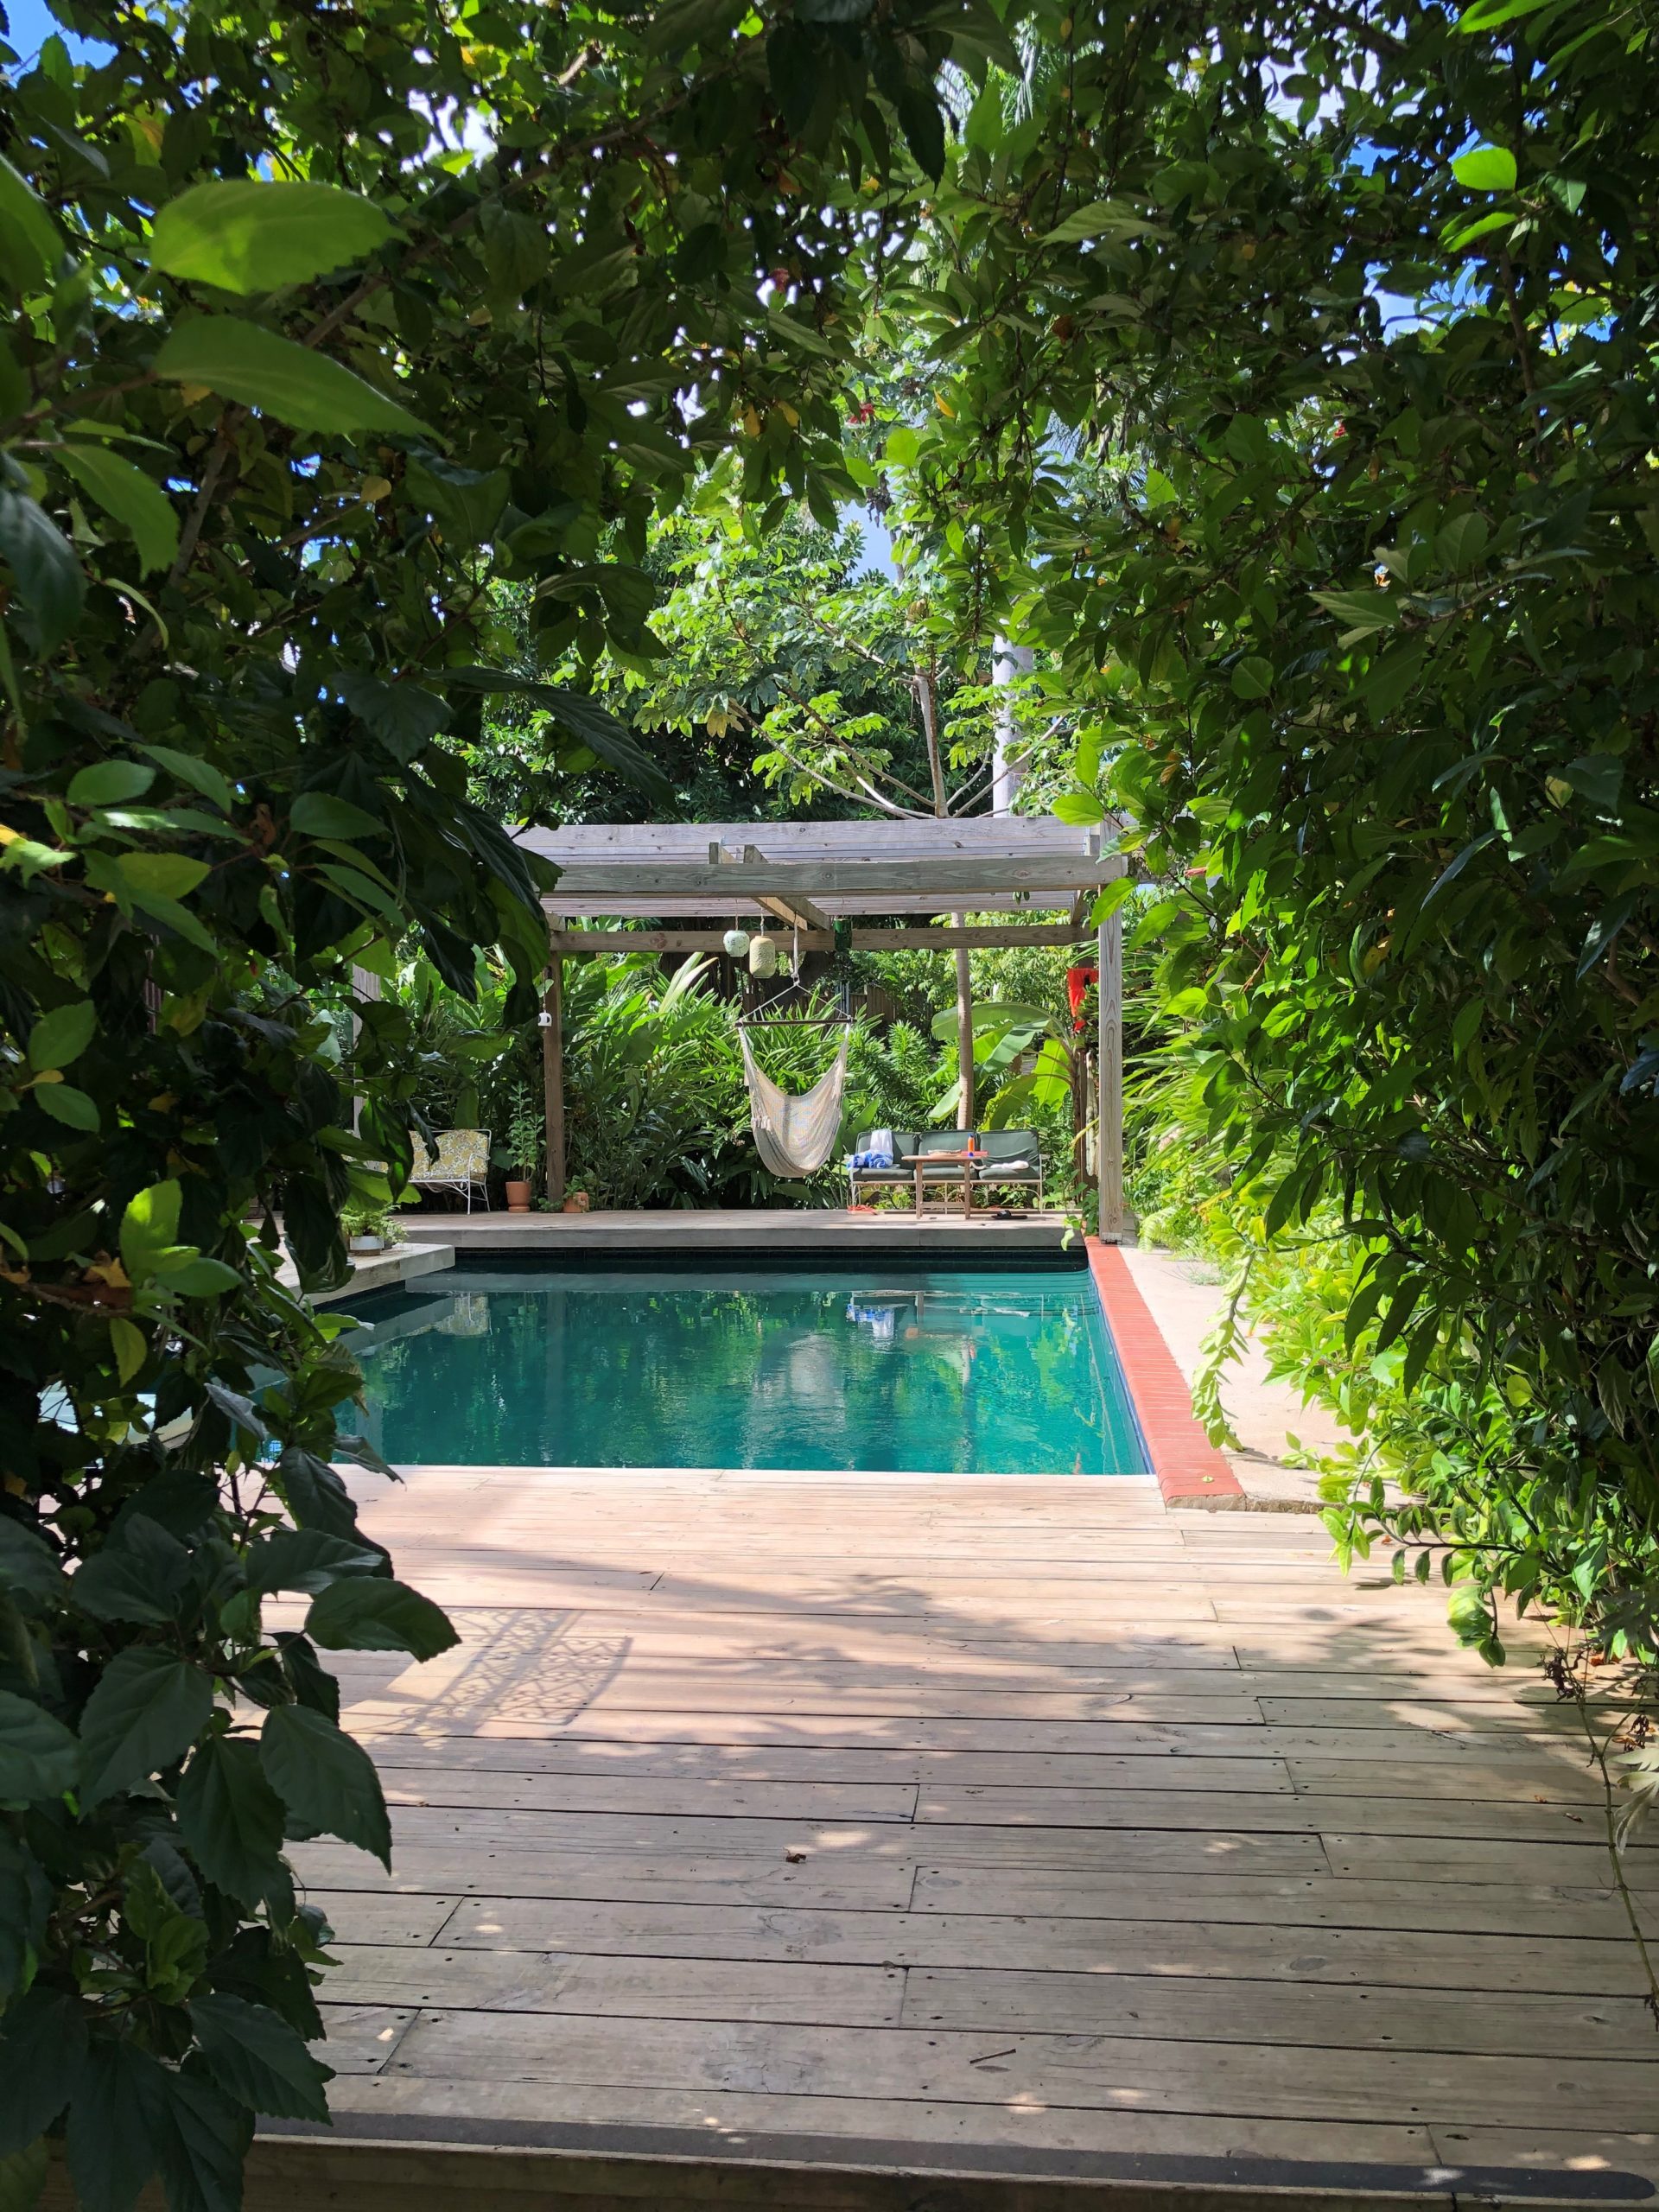 Jungle Tree Casa Escape Finca Victoria’s pool area which offers complimentary morning yoga with breakfast.